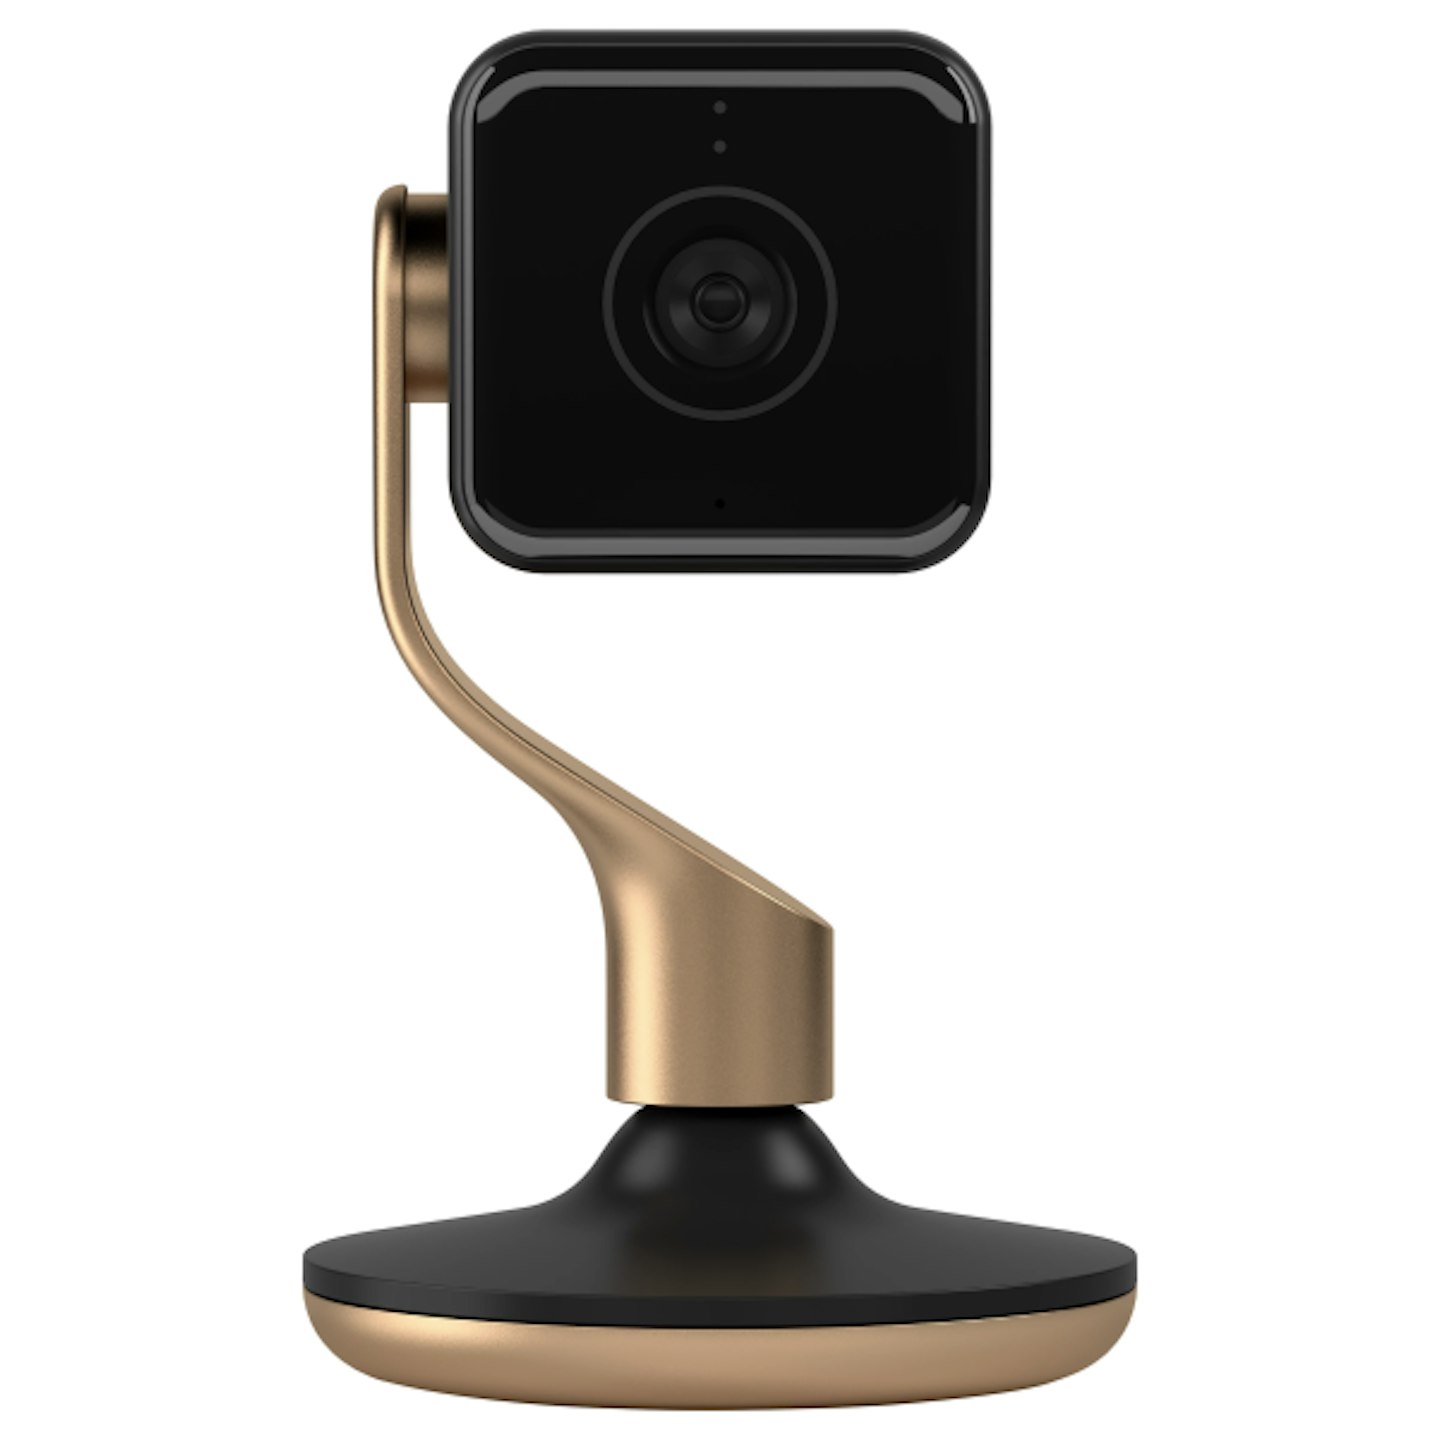 Hive View Home Security Camera